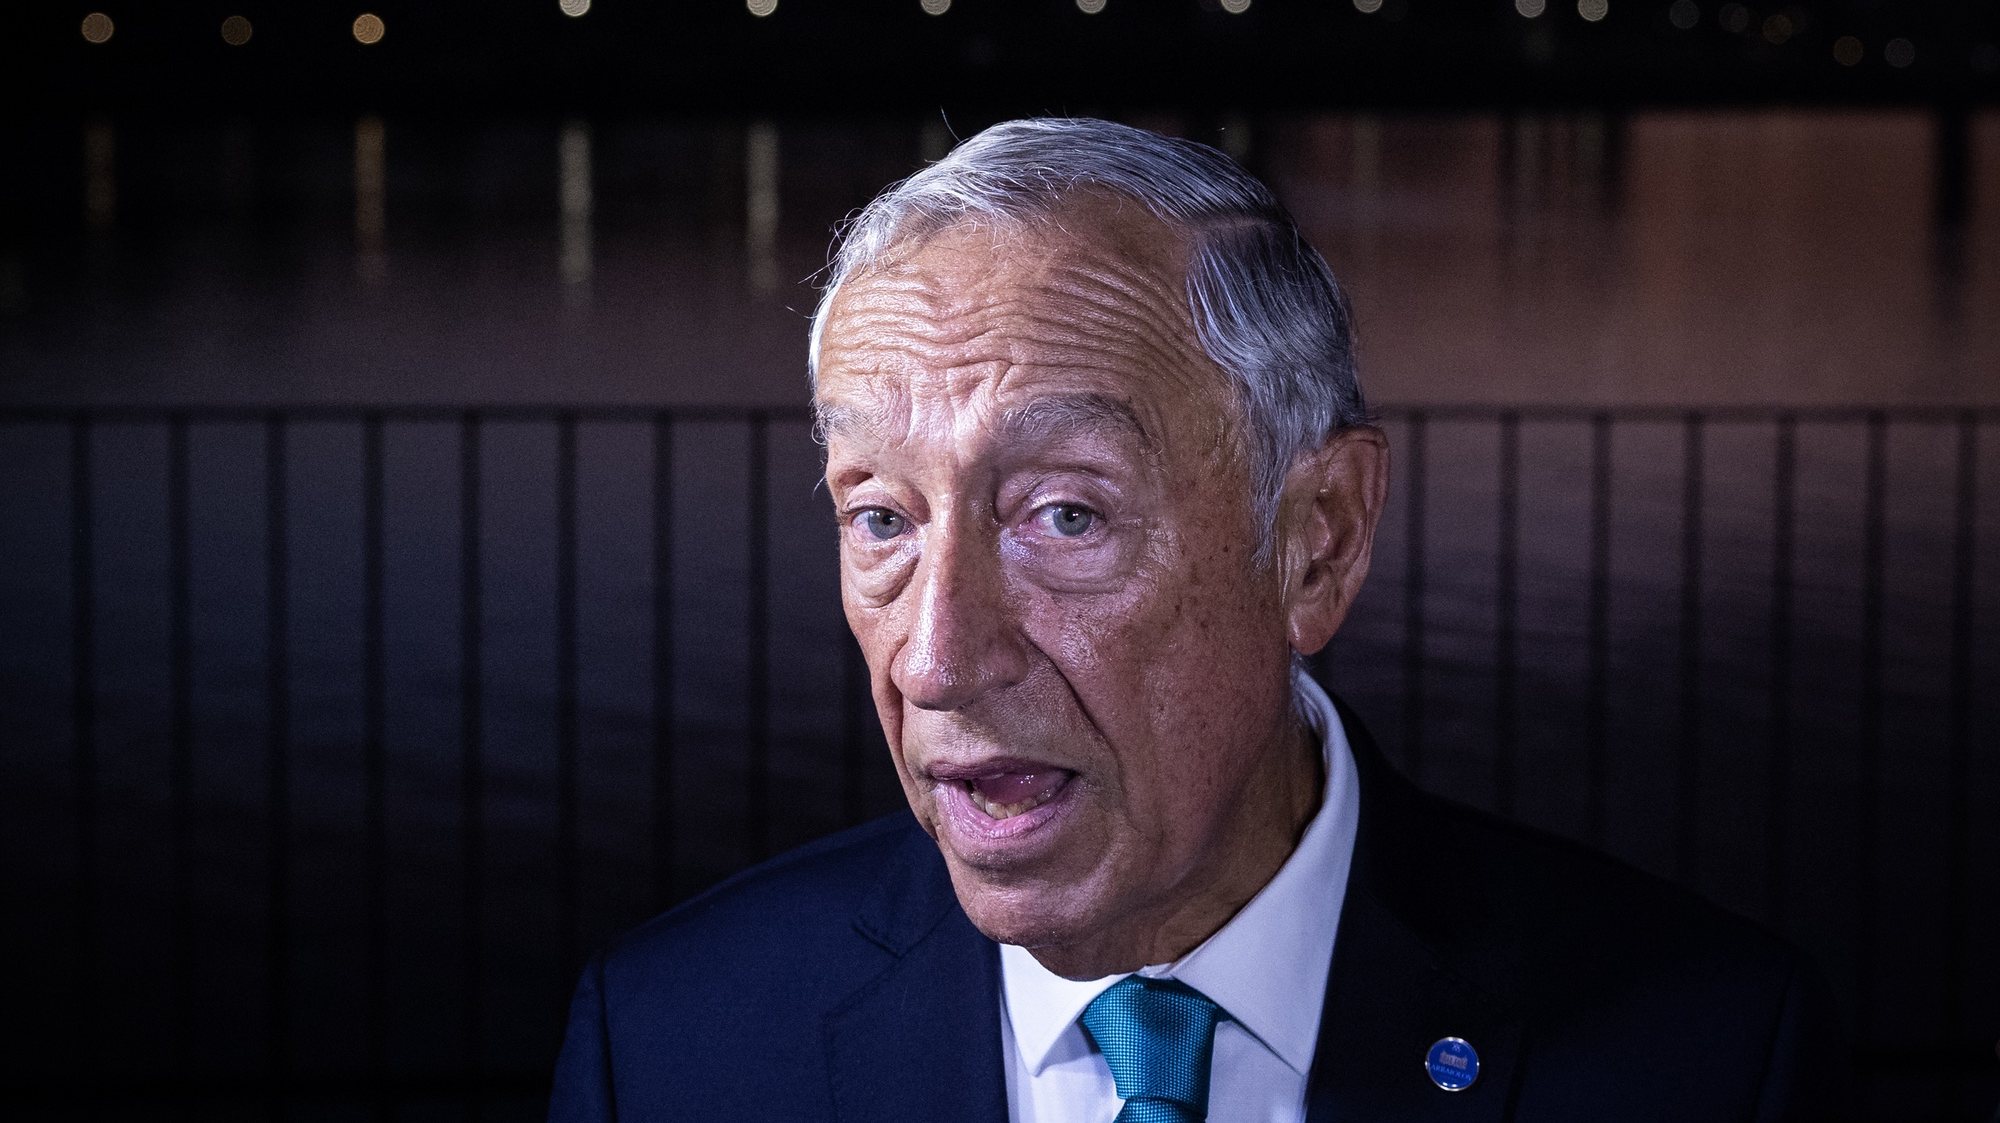 Portuguese President Marcelo Rebelo de Sousa speaks to media during the 18th Informal Meeting of the Non-Executive Heads of State of the European Union, known as the &#039;Arraiolos Group&#039;, in Porto, Portugal, 06 October 2023. The Arraiolos Group was established in 2003 in Arraiolos, Portugal. This meeting was attended by presidents from 13 countries, including Bulgaria, Italy, Estonia, Ireland, Greece, Croatia, Latvia, Hungary, Poland, Portugal, Finland, Malta, and Slovenia. JOSE COELHO/LUSA